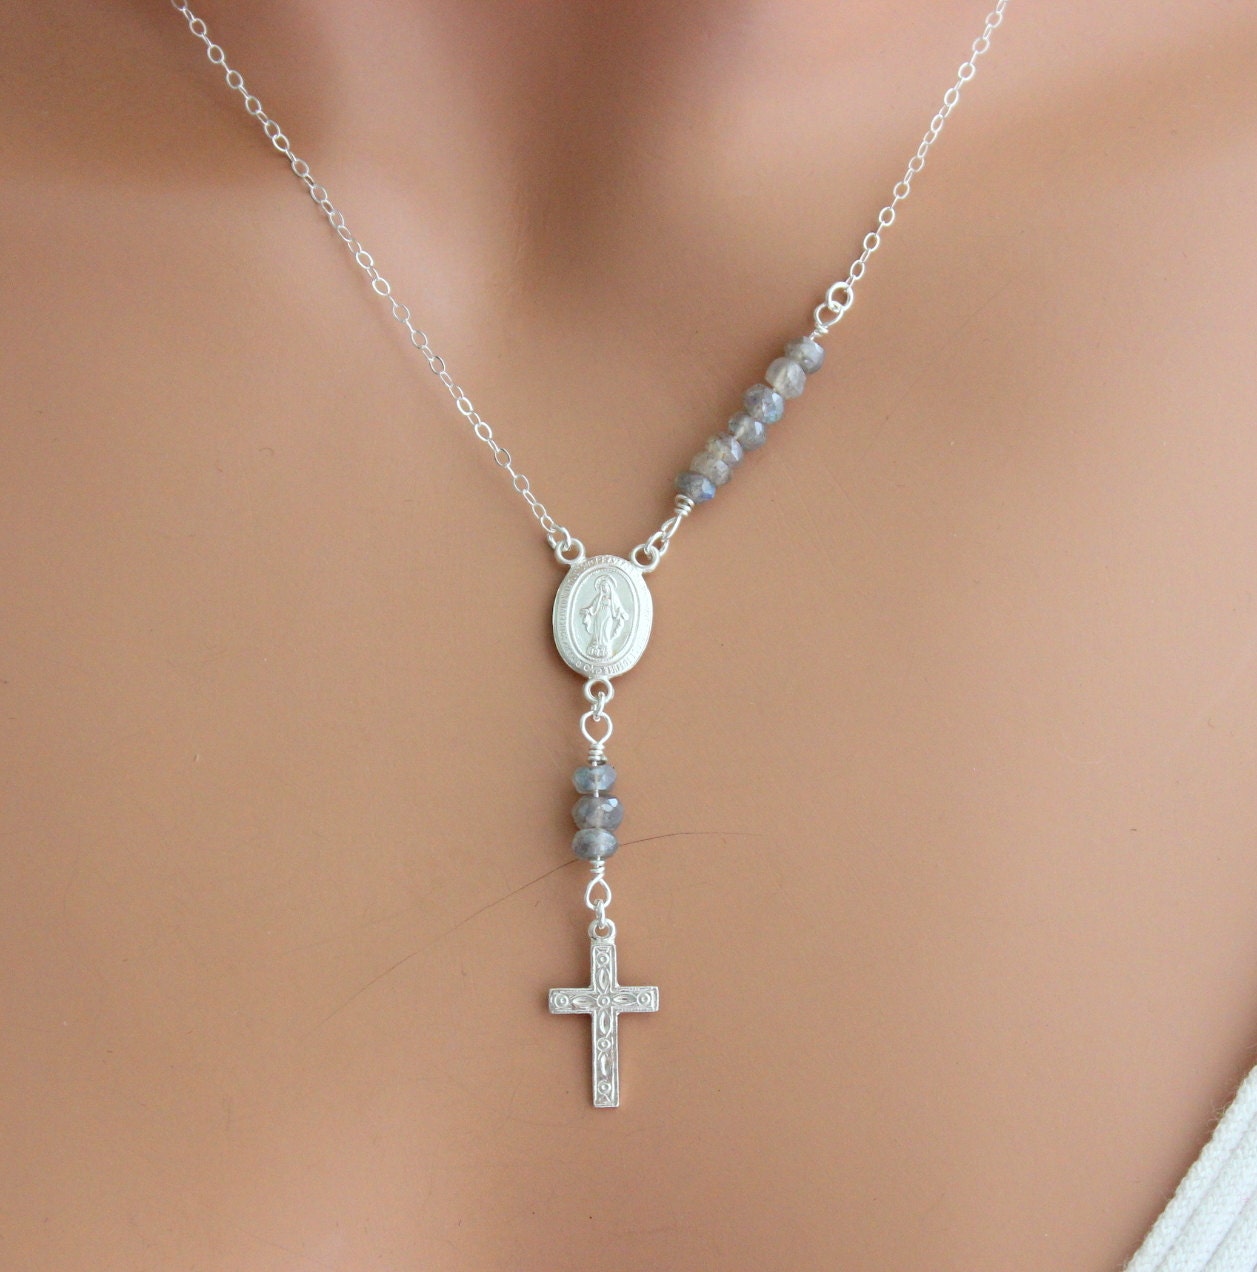 Rosary Pendant Necklace - upside down cross necklace - Luxusteel Shell  Necklace Collier Female Steel Gold Color Round Pendant Necklaces Chains  Jewelry Accessories - cross chain for women, (silver black, O)